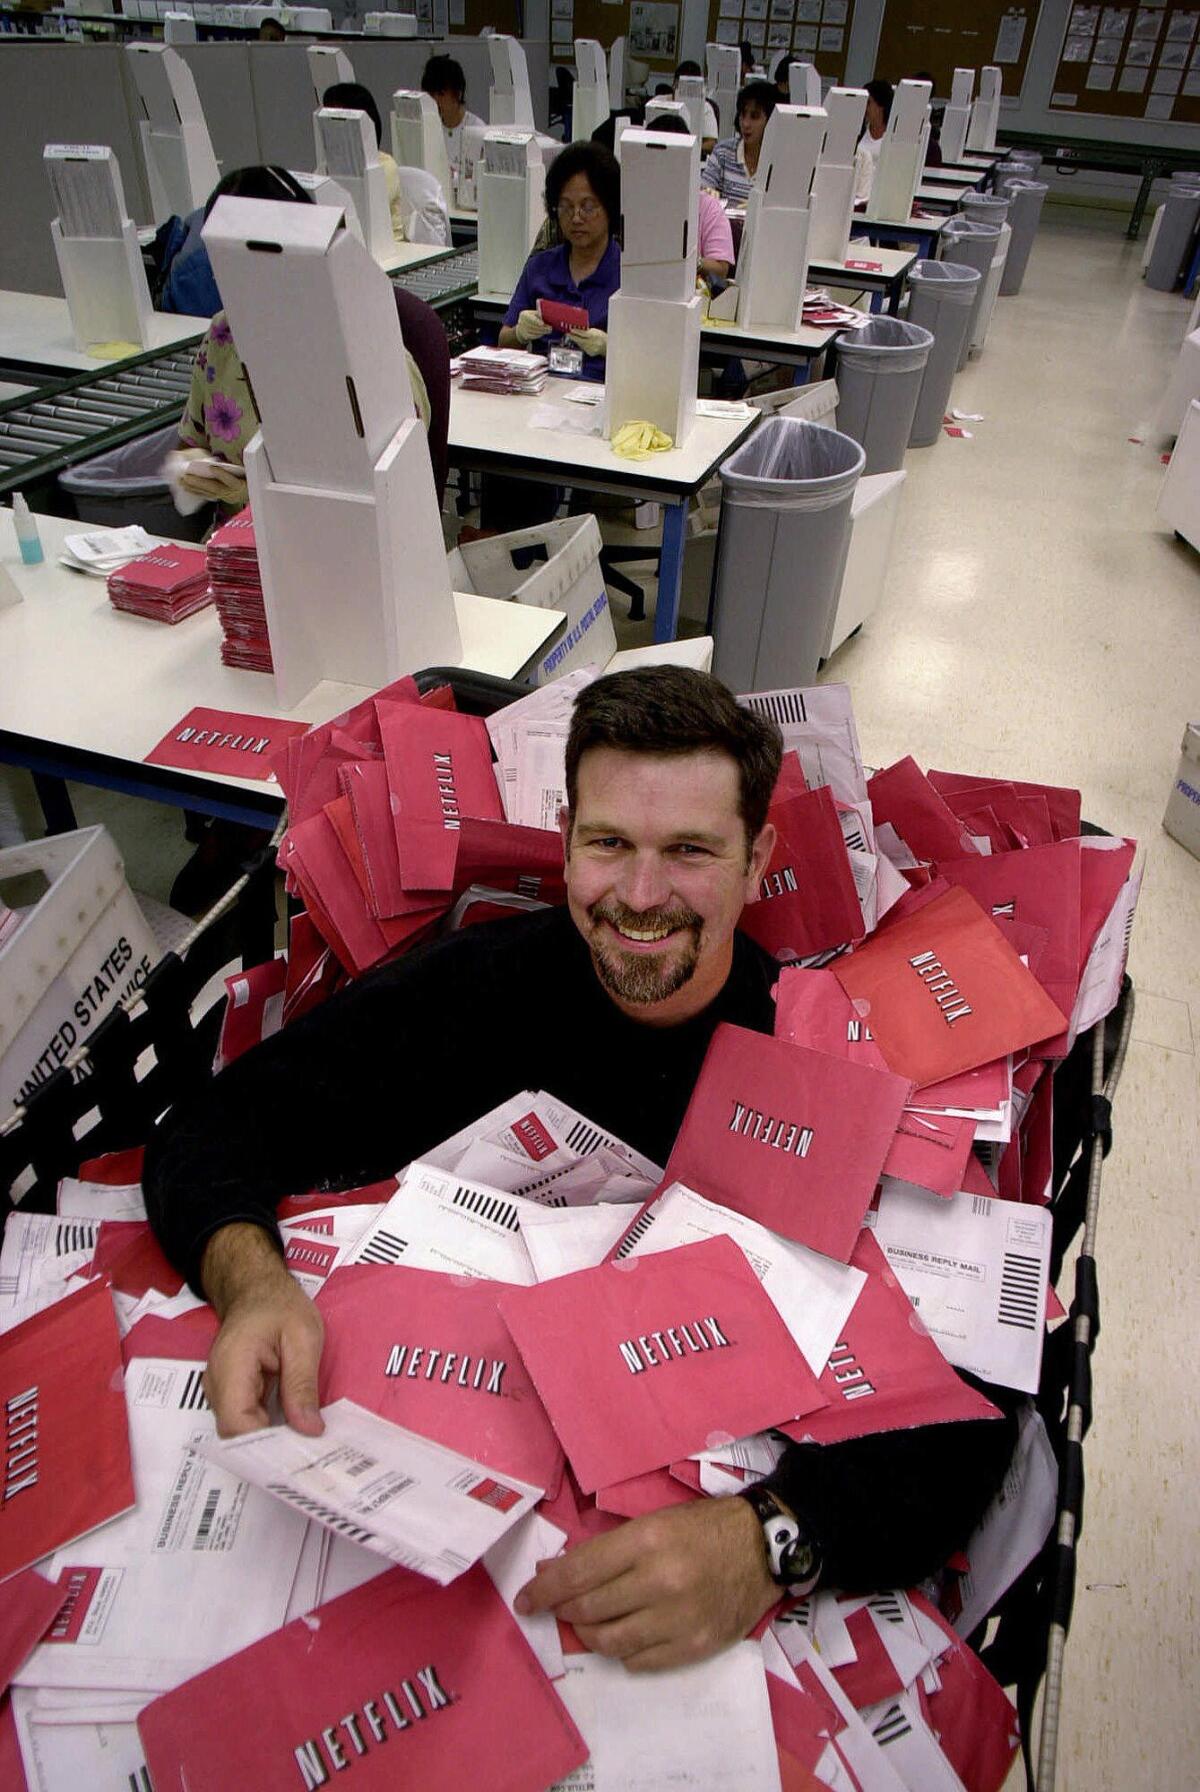 Netflix chief executive Reed Hastings sits in a mail delivery case of thousands of DVDs at their distribution plant in San Jose, Calif.